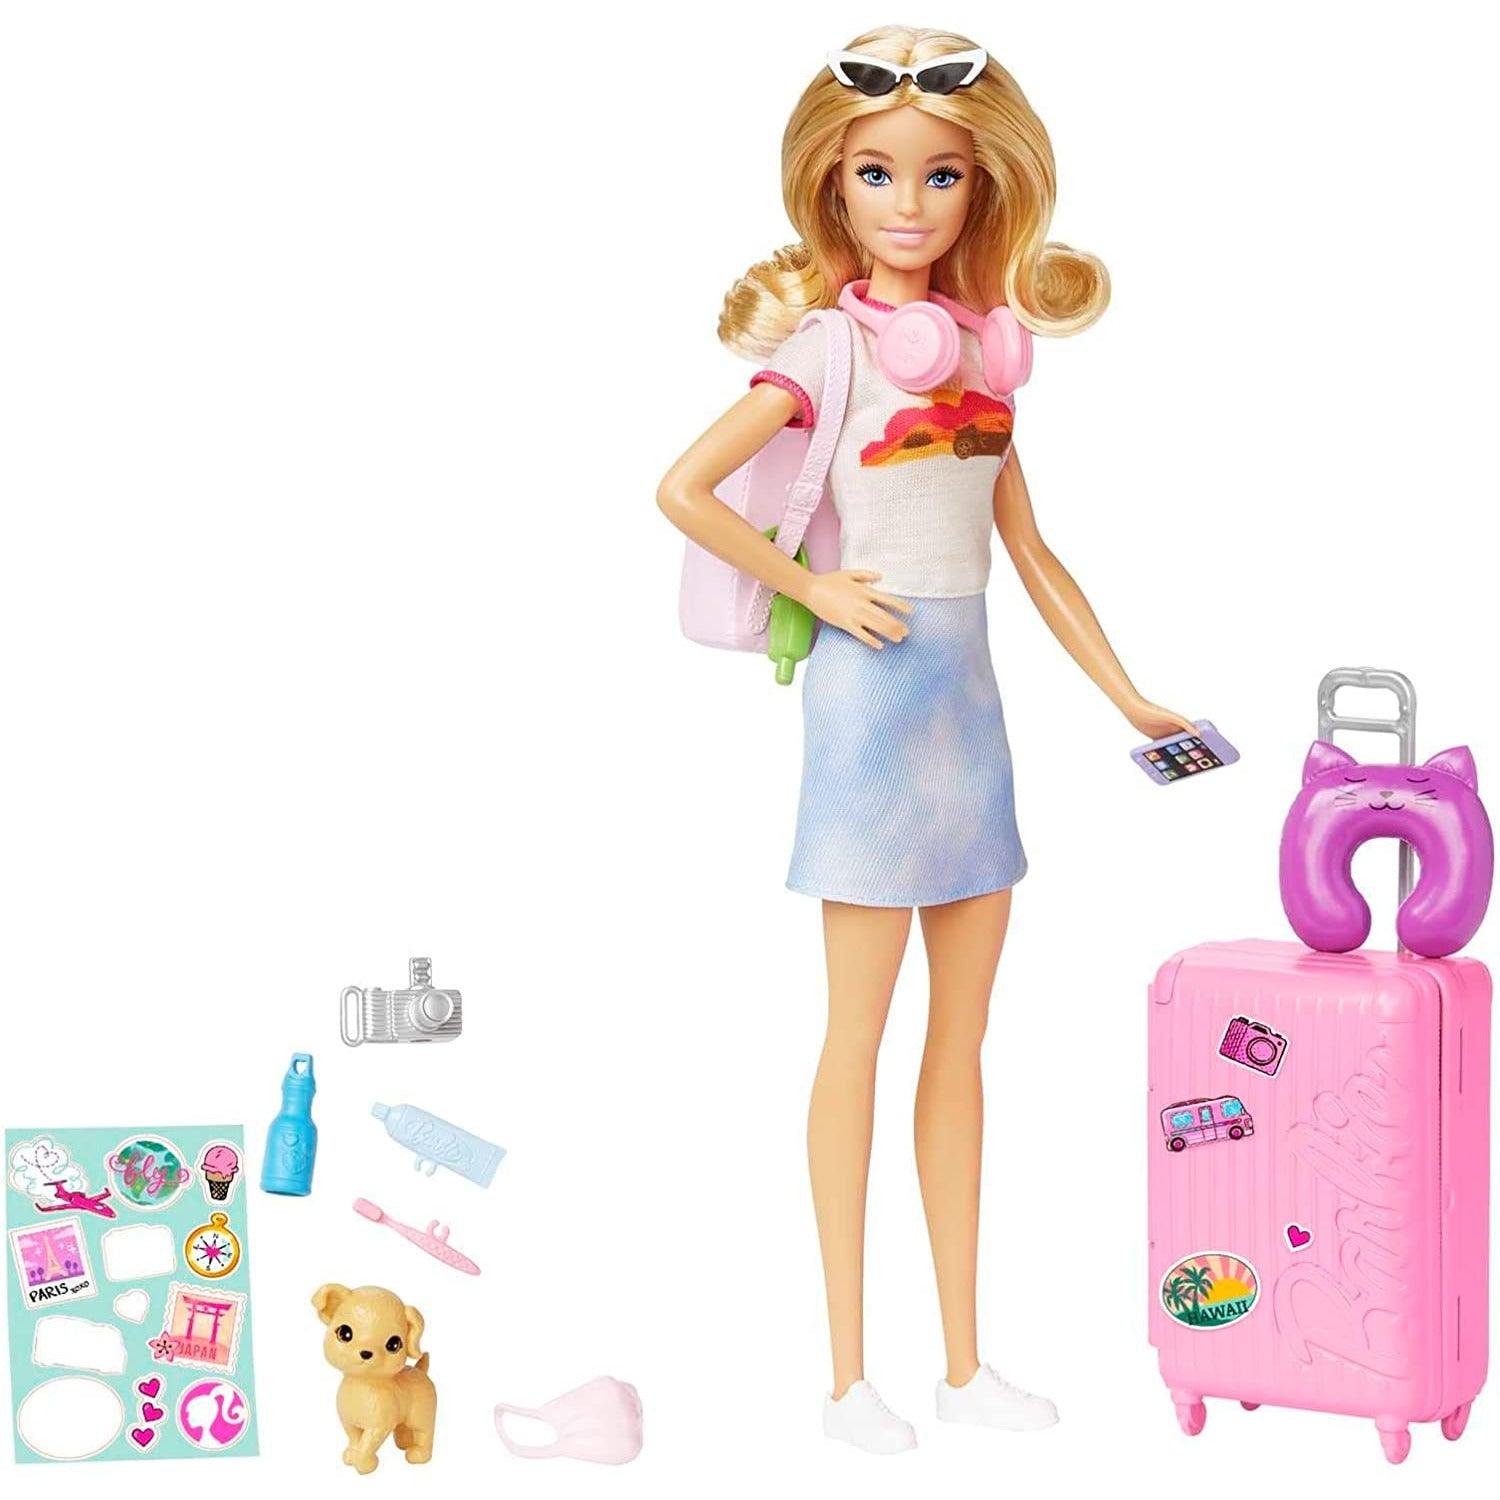 Barbie Doll & Accessories, Travel Set with Puppy, Malibu Doll with Blonde Hair - BumbleToys - 2-4 Years, 3+ years, 4+ Years, 5-7 Years, Barbie, Dolls, Fashion Dolls & Accessories, Girls, Pre-Order